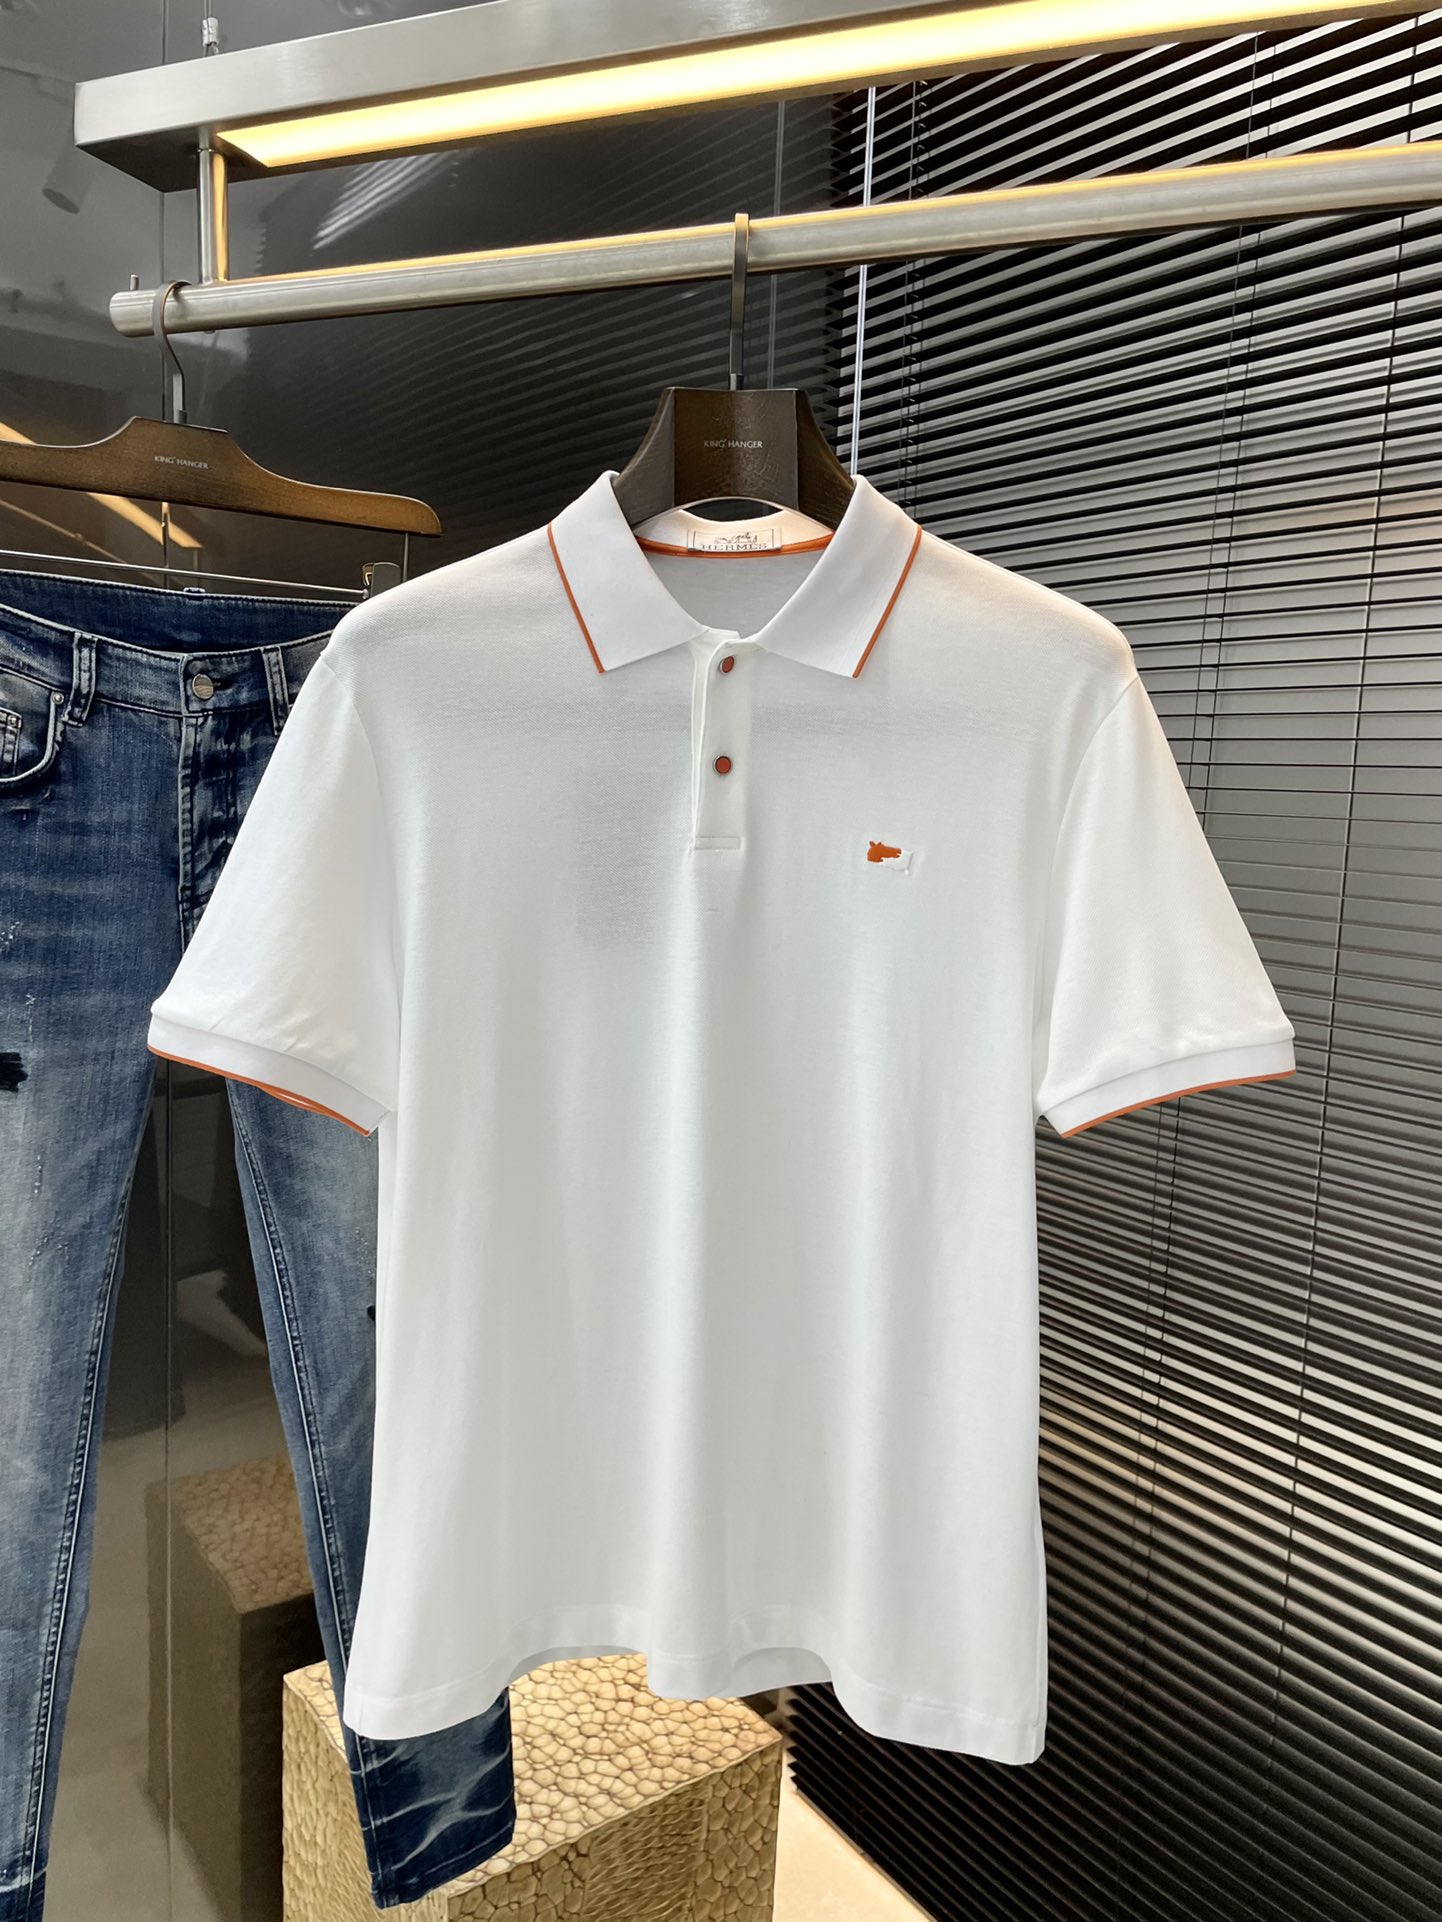 Hermes Clothing Polo T-Shirt AAA Replica Designer
 Splicing Cotton Spring/Summer Collection Fashion Short Sleeve